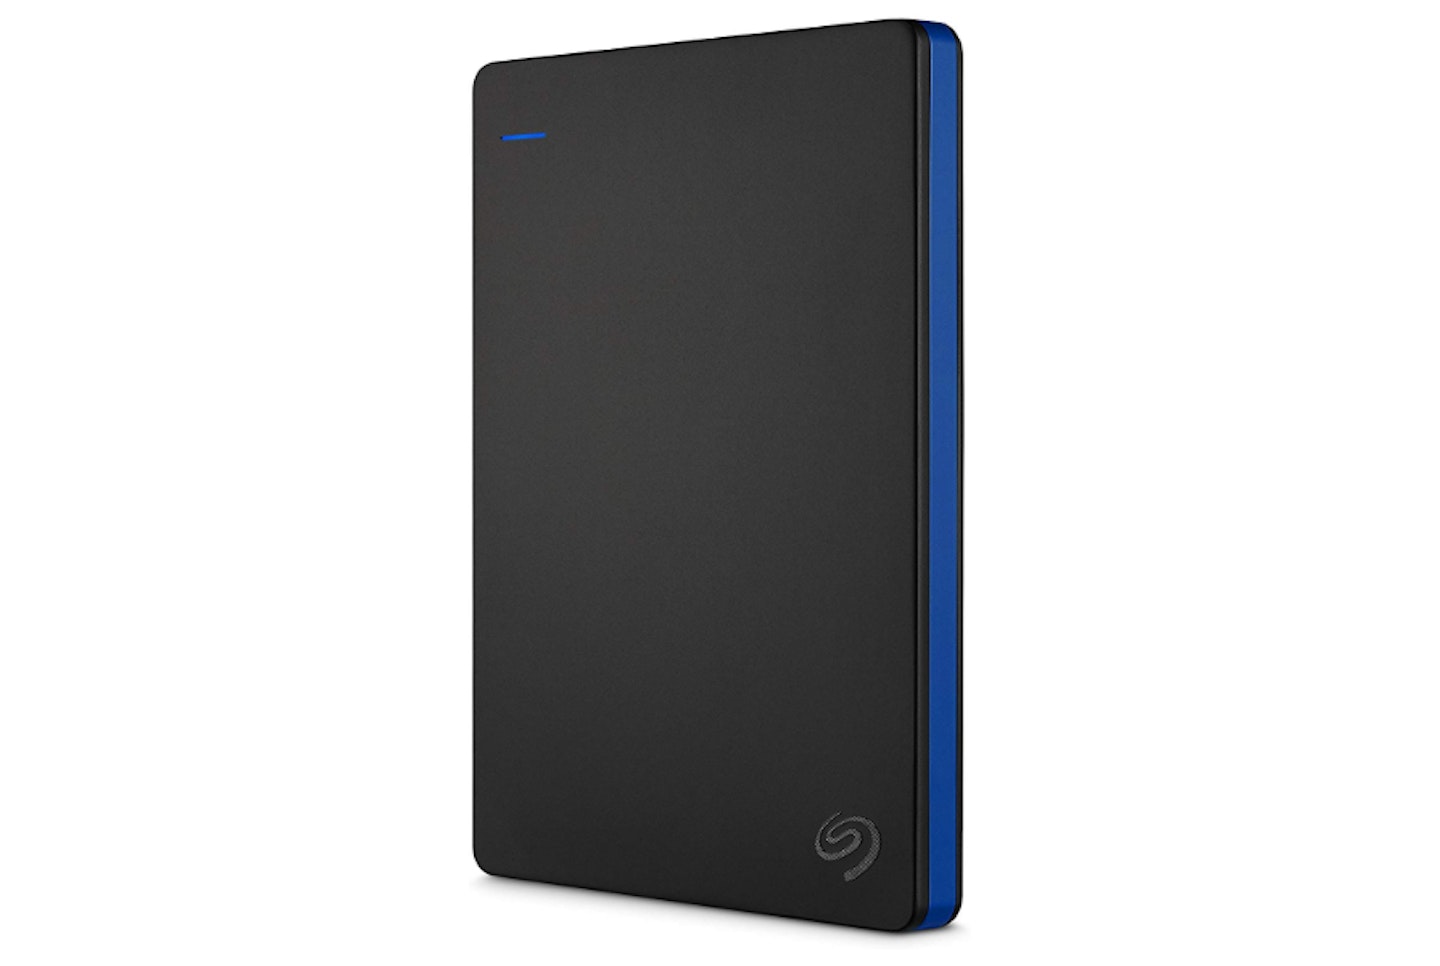 Seagate 4 TB Game Drive External Hard Drive for PS4